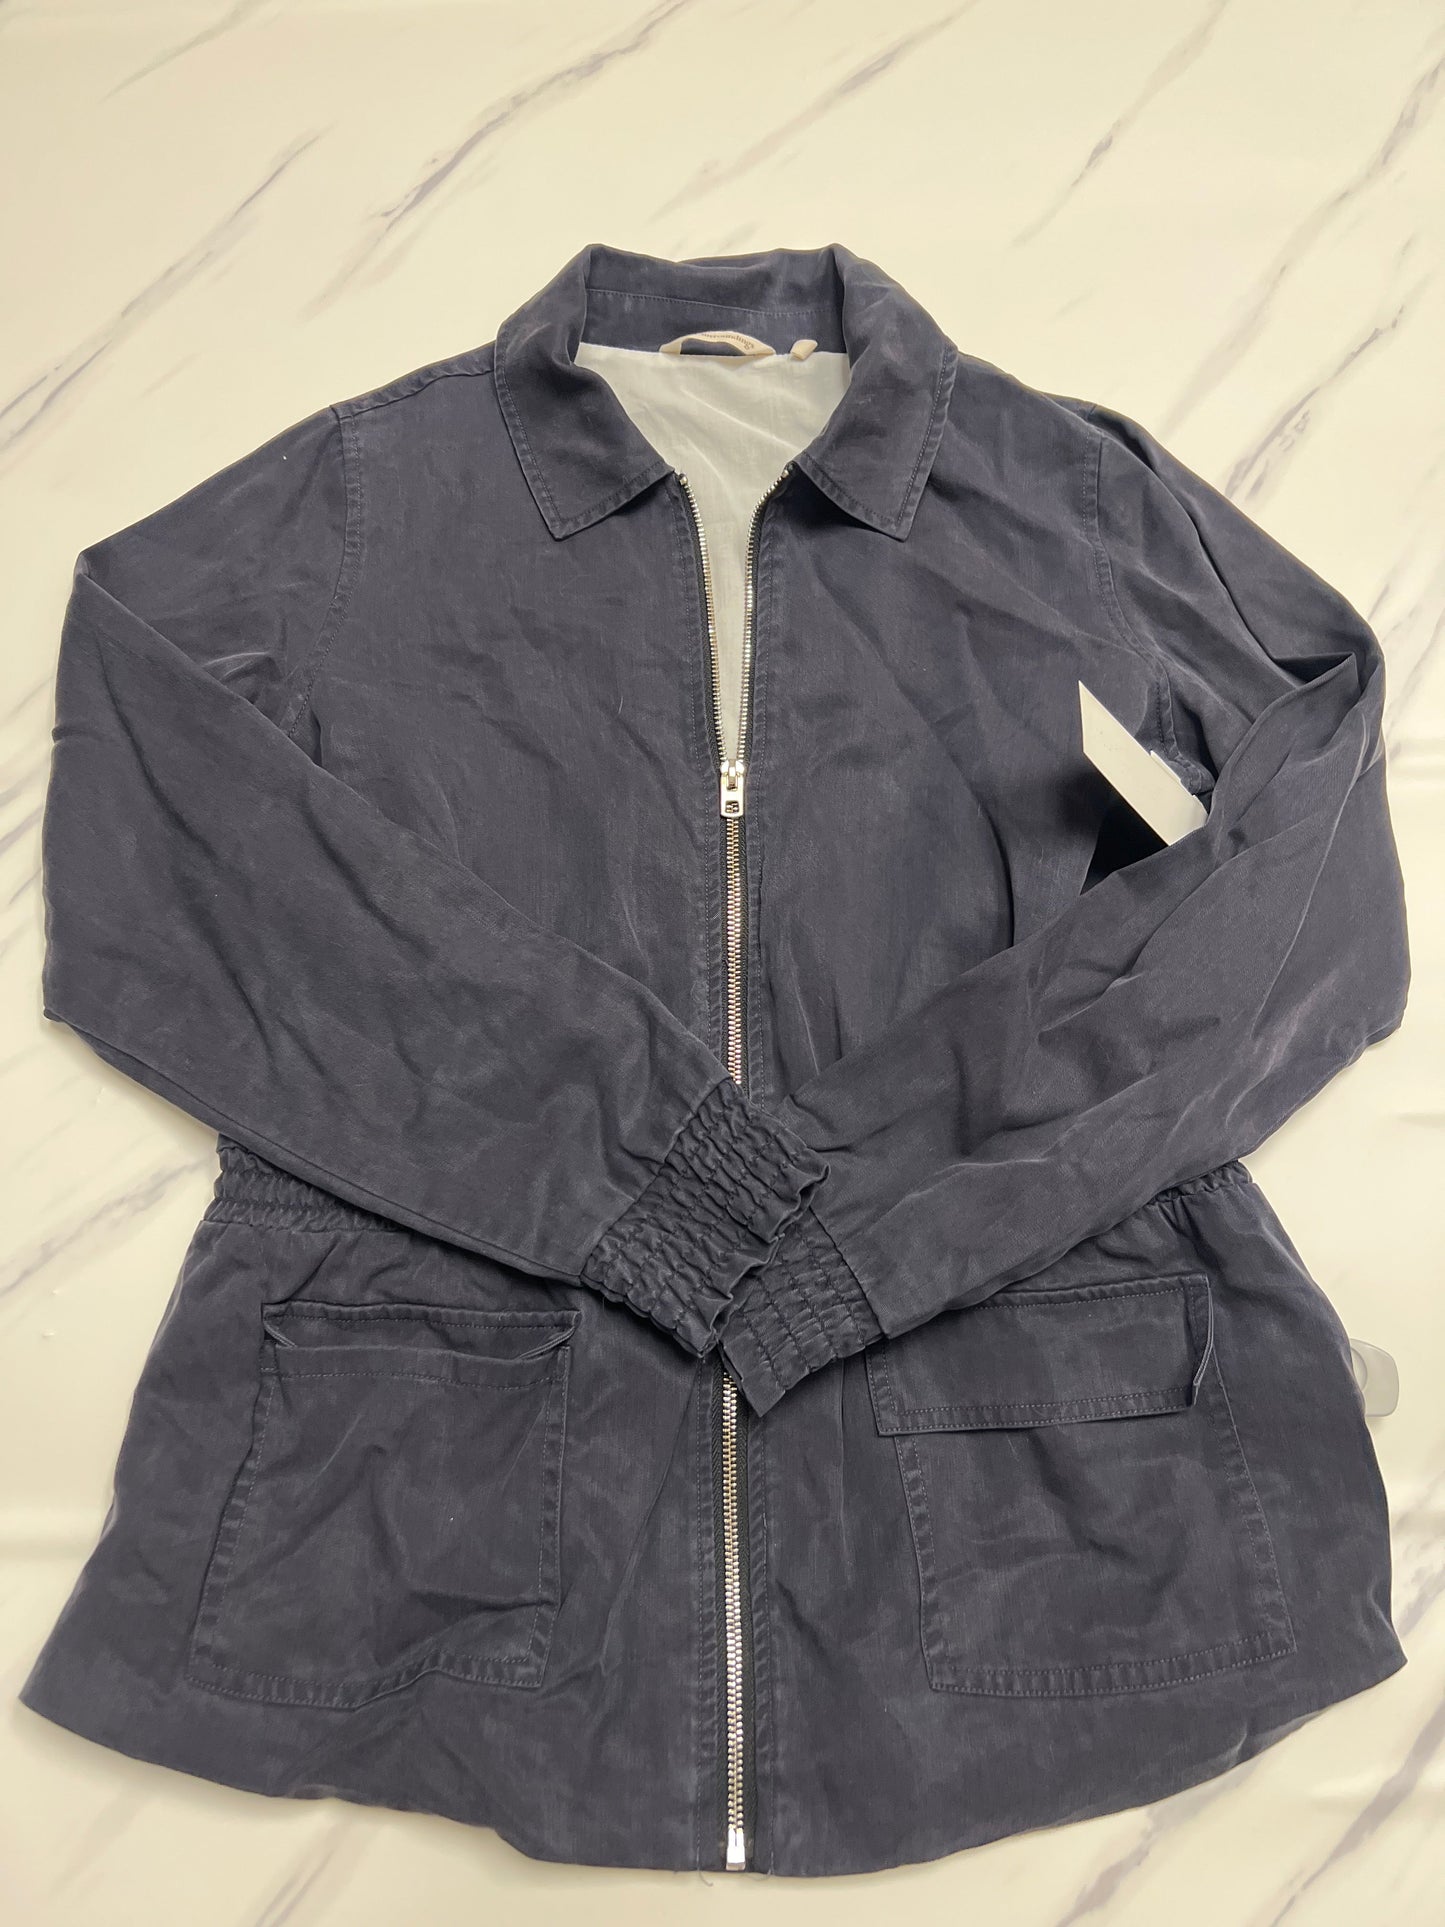 Jacket Other By Soft Surroundings  Size: S